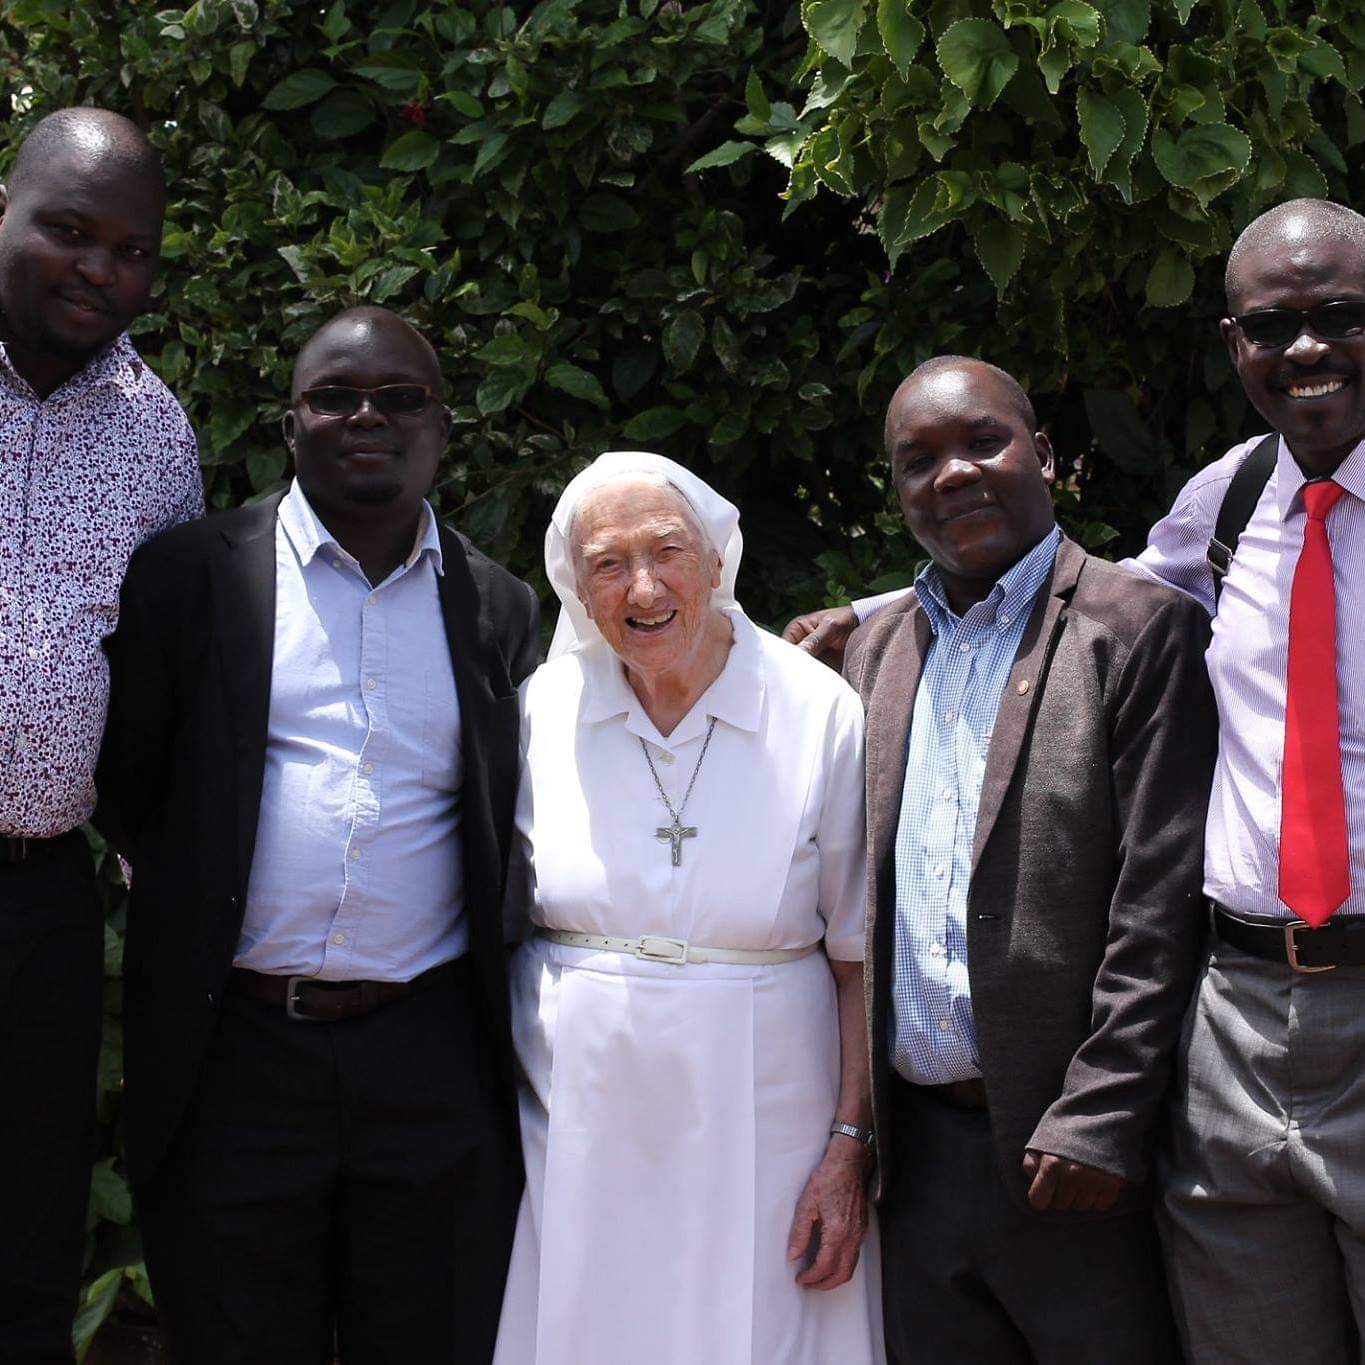 The former Headmistress Sr.Veronica Landoro meets some Old Boys before she returned to Italy in 2017